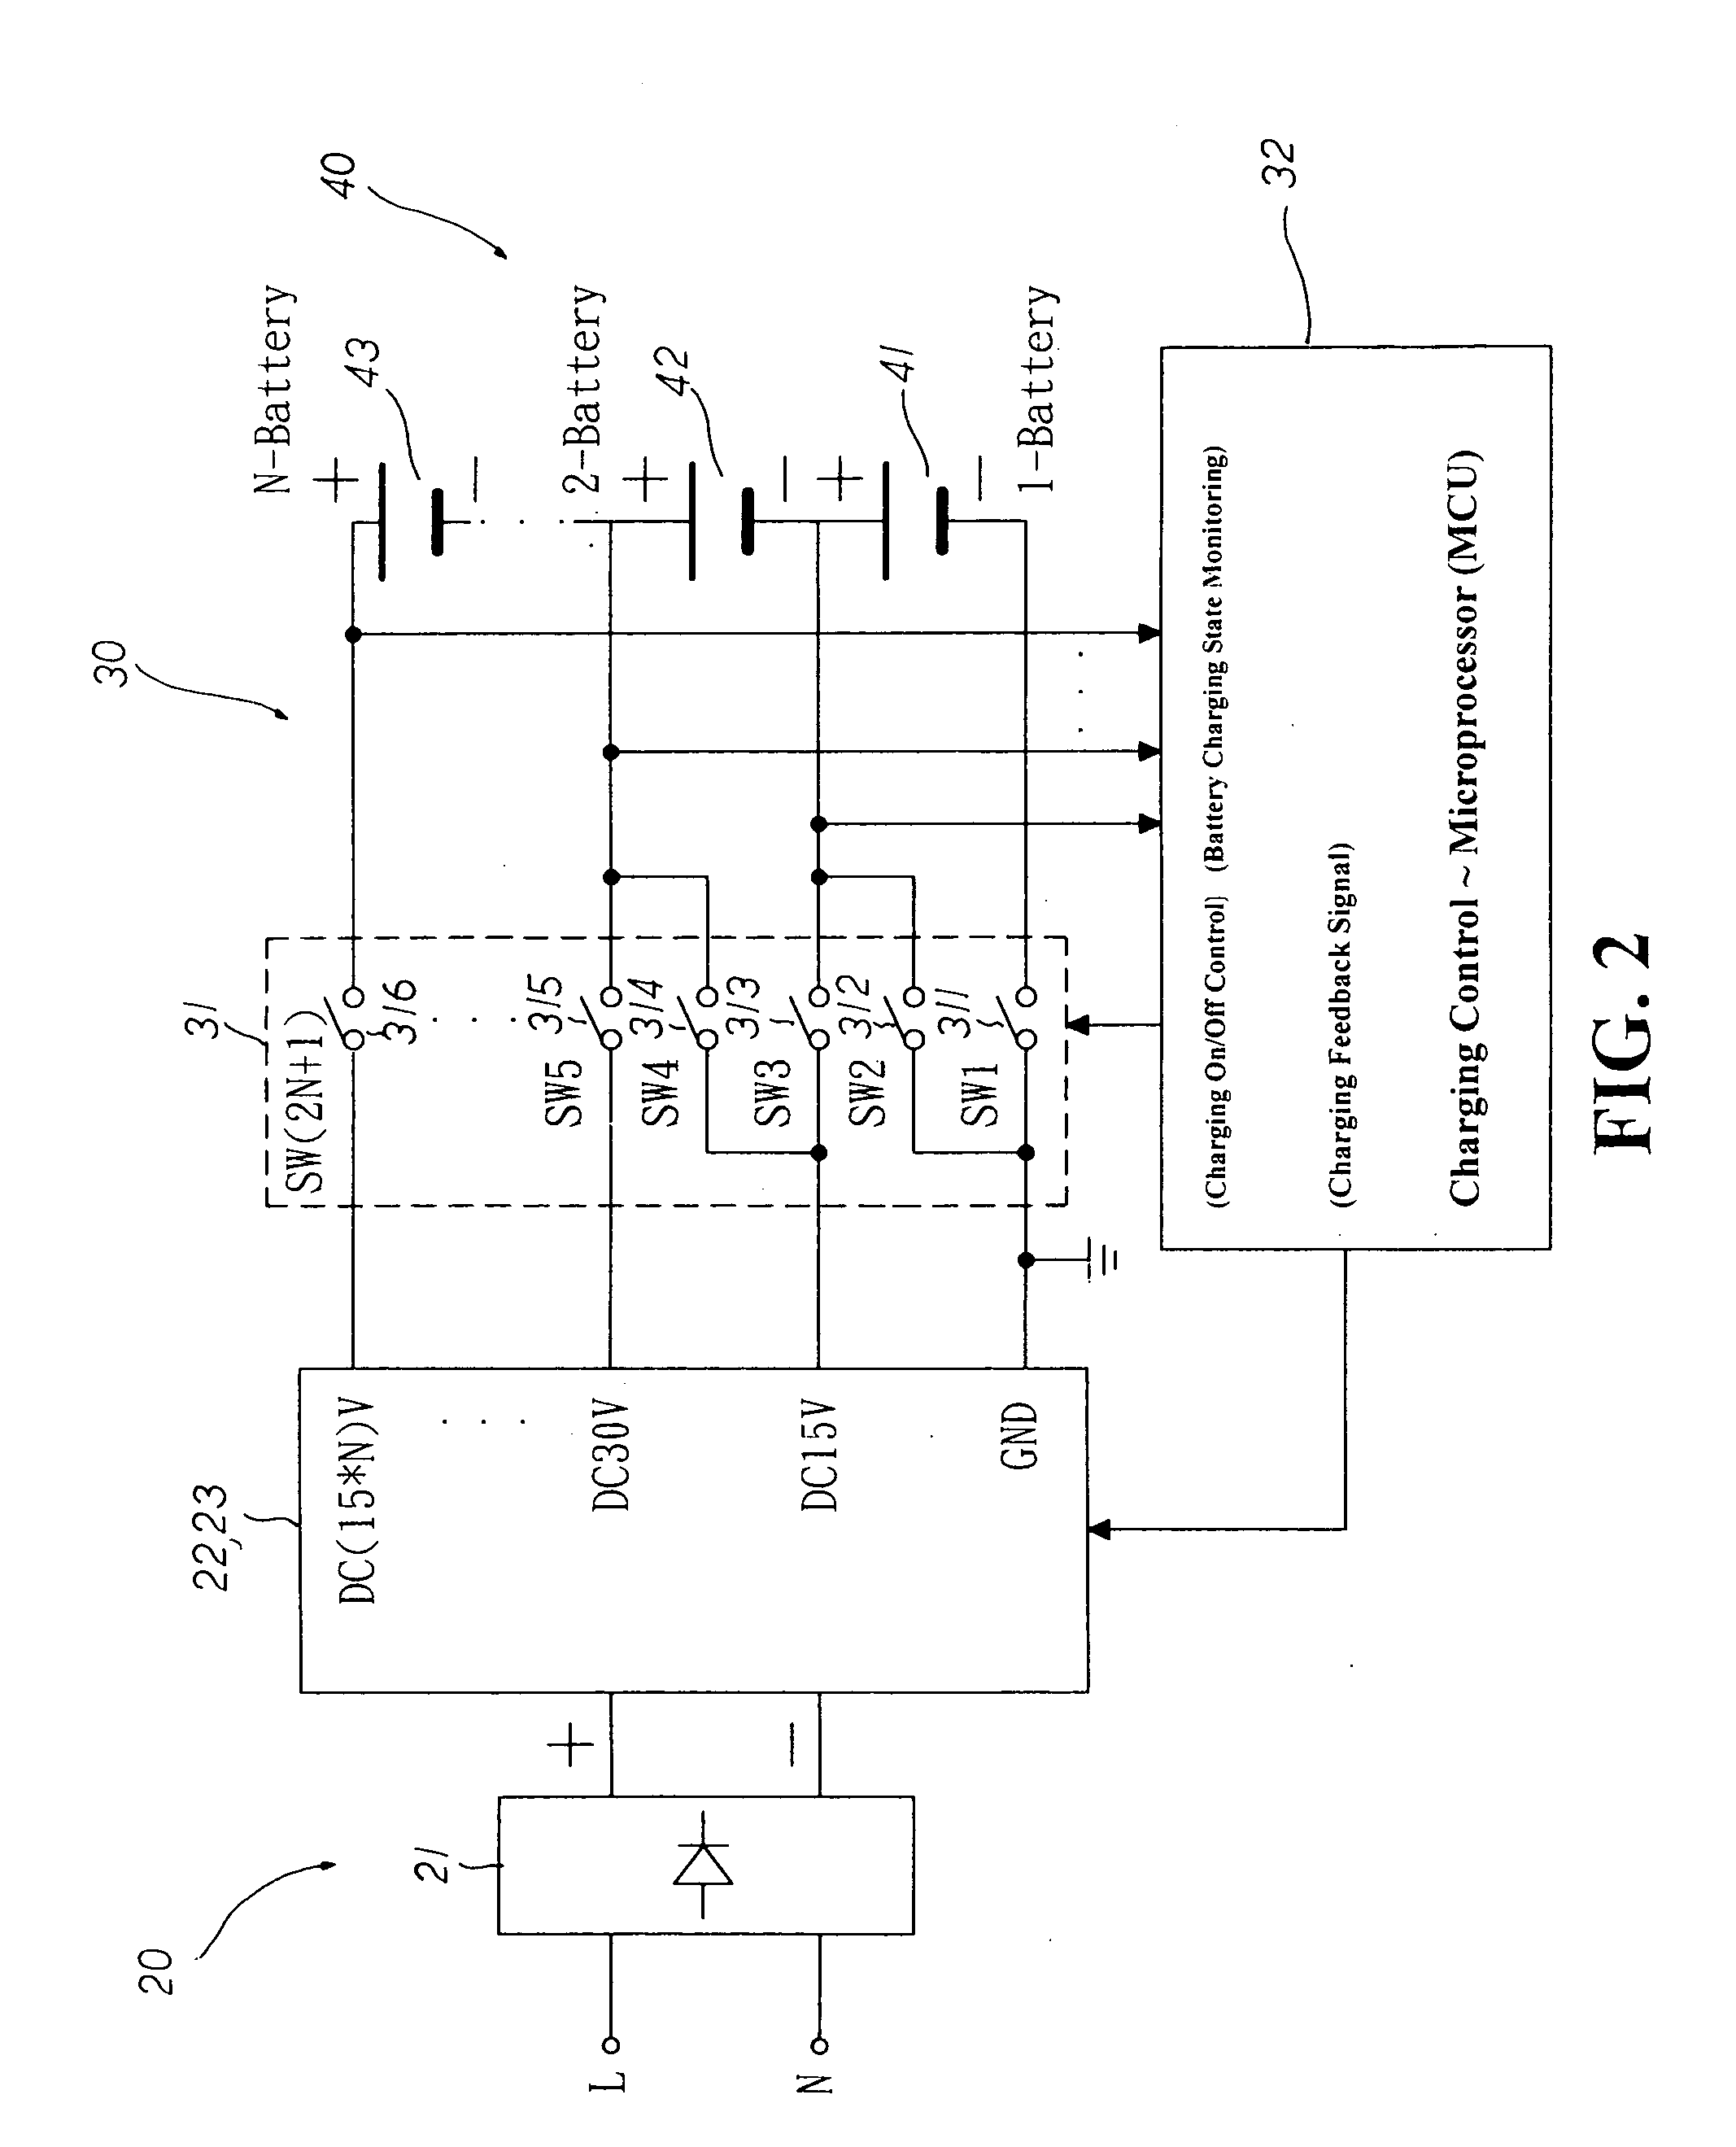 Intelligent equalizing battery charger having equalization charging circuitry